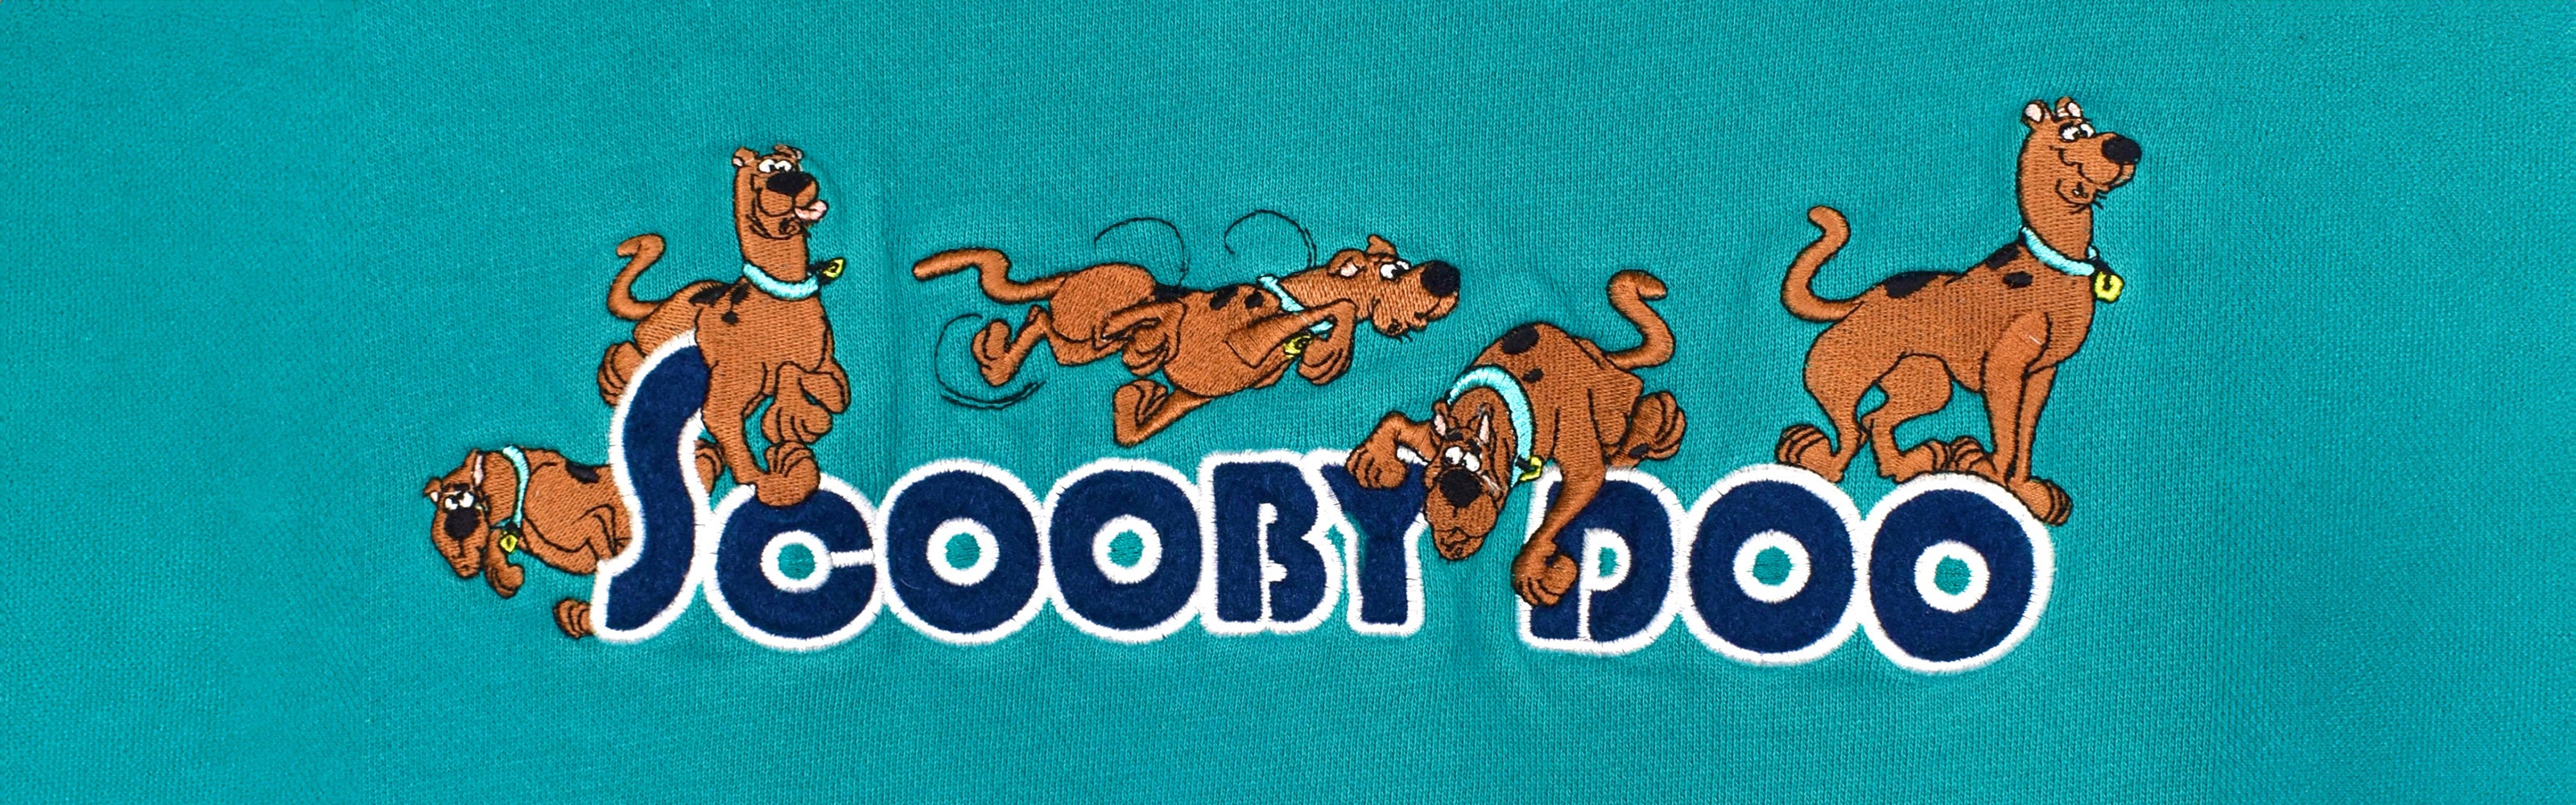 Close-up of a blue vintage sweatshirt with detailed embroidery of Scooby-Doo as the focal point.